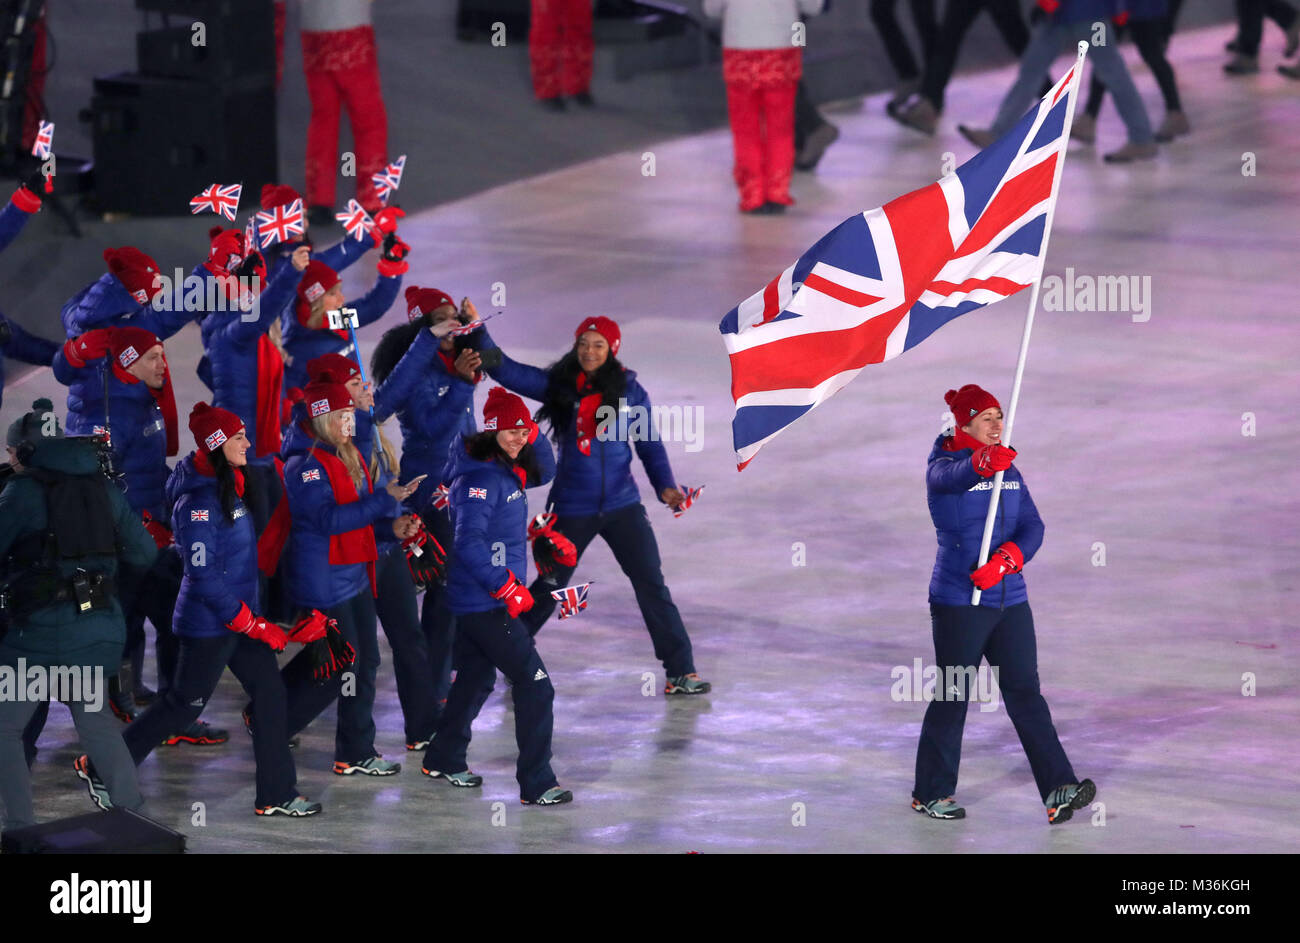 Great Britain flag-bearer Lizzy Yarnold during the Opening Ceremony of the PyeongChang 2018 Winter Olympic Games at the PyeongChang Olympic Stadium in South Korea. Stock Photo